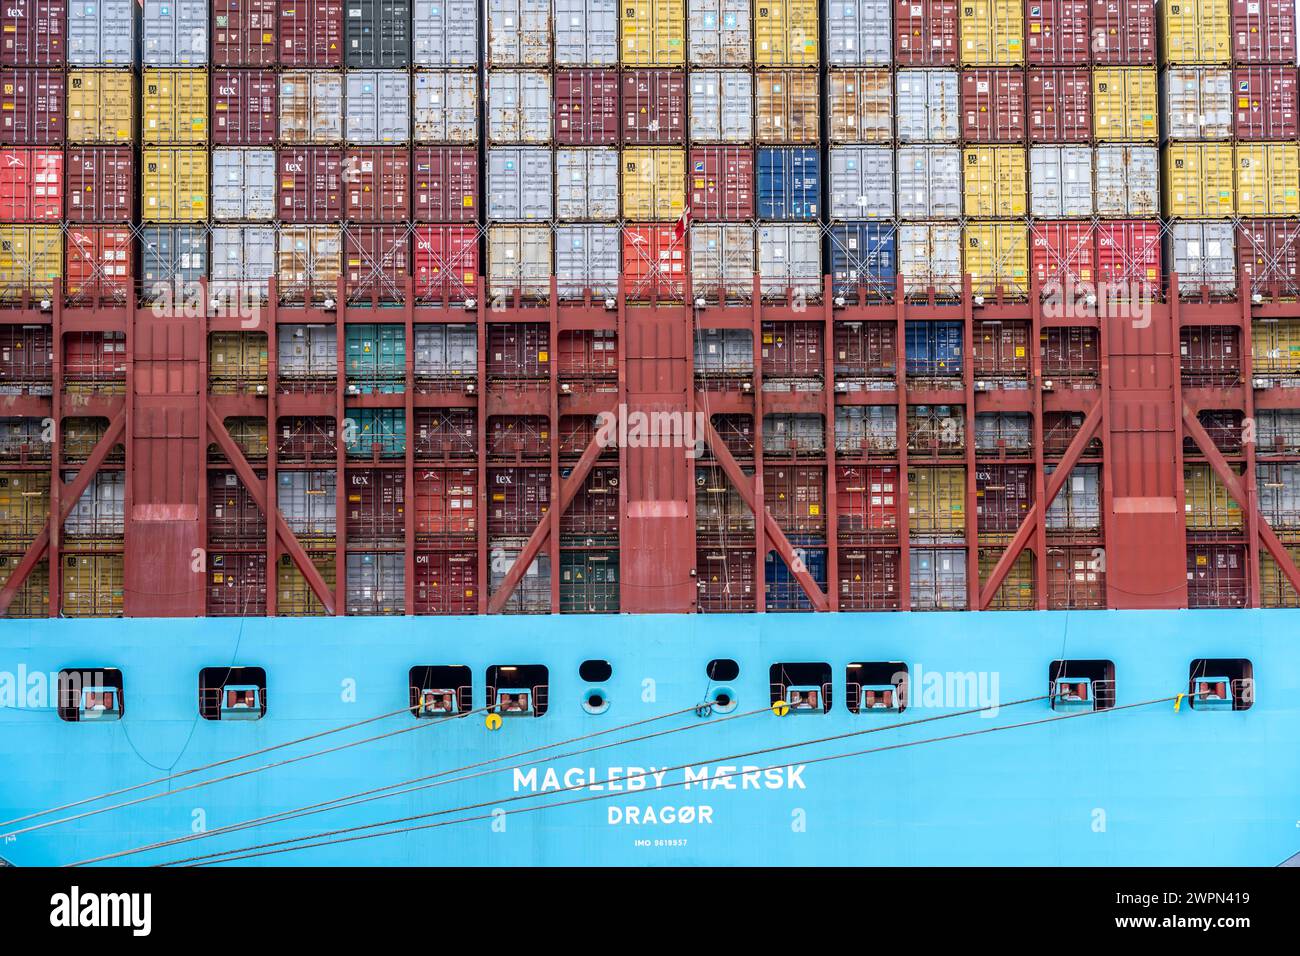 Magleby Maersk container freighter at EUROGATE Container Terminal, Waltershofer Hafen, is one of the largest container ships in the world, capacity of Stock Photo